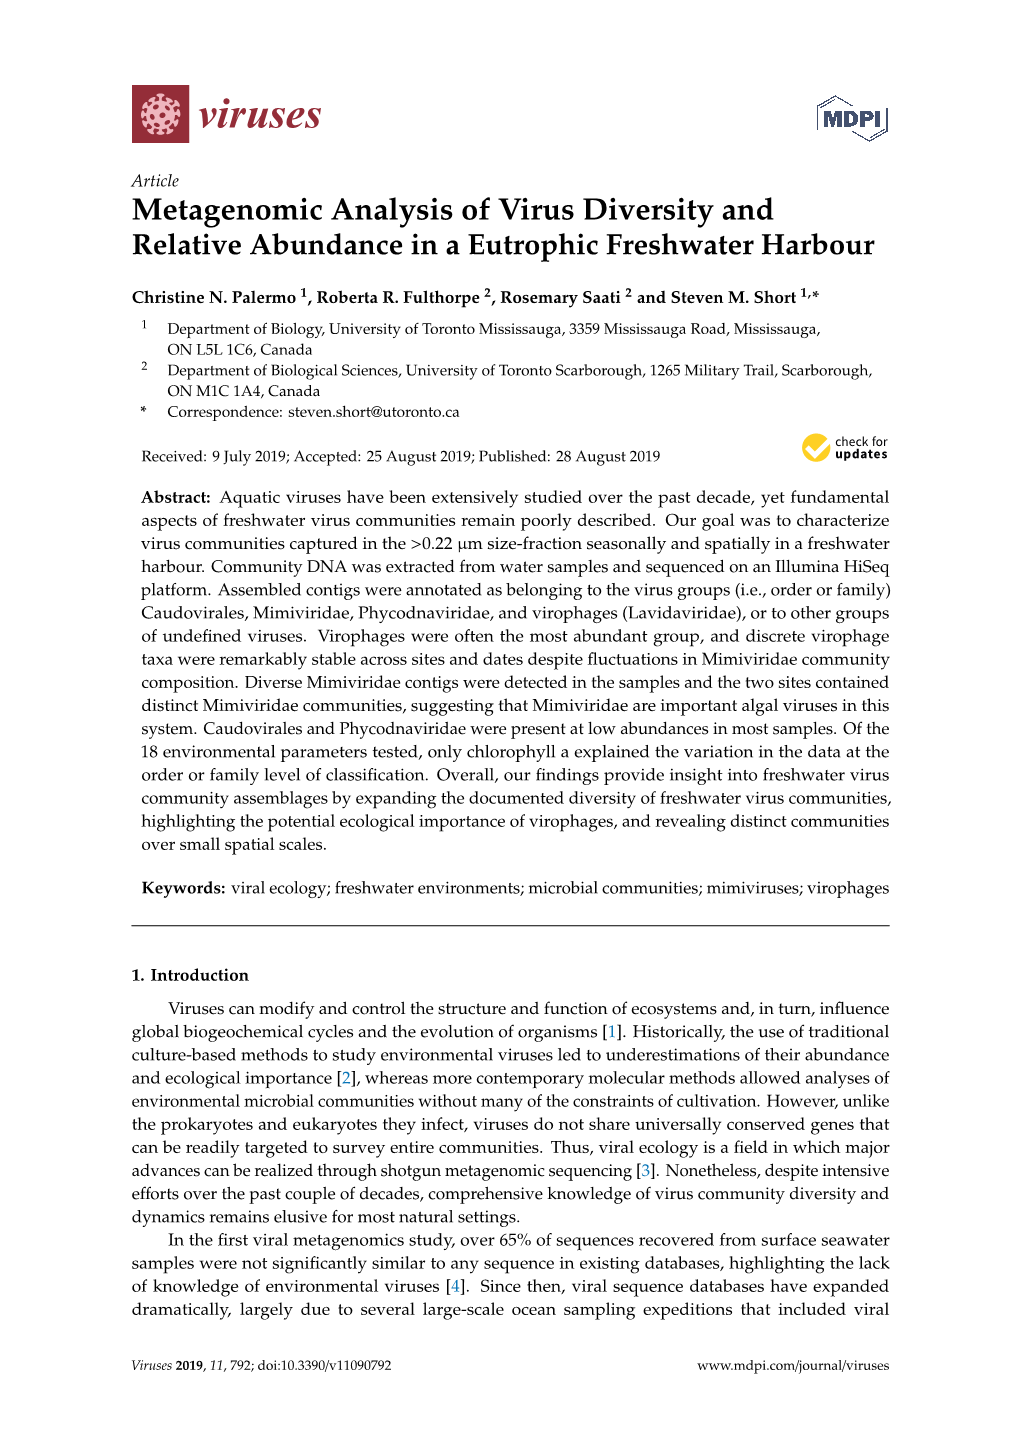 [0.95]Relative Abundance in a Eutrophic Freshwater Harbour